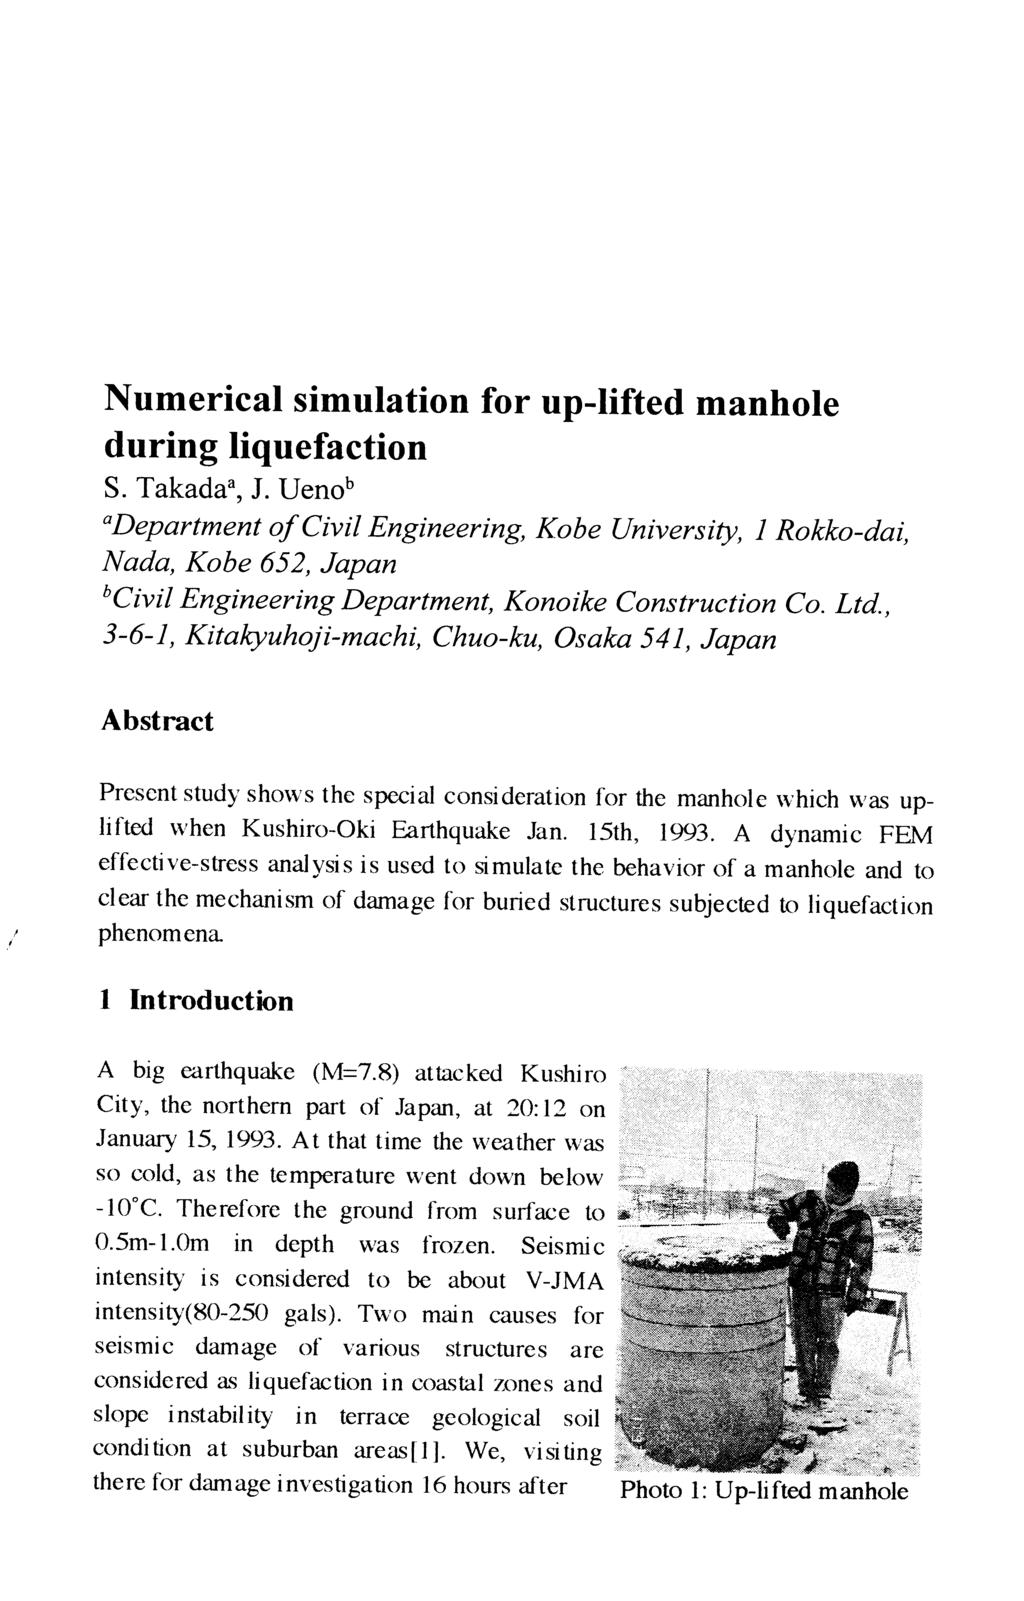 Numerical simulation for up-lifted manhole during liquefaction S. Takada*, J.